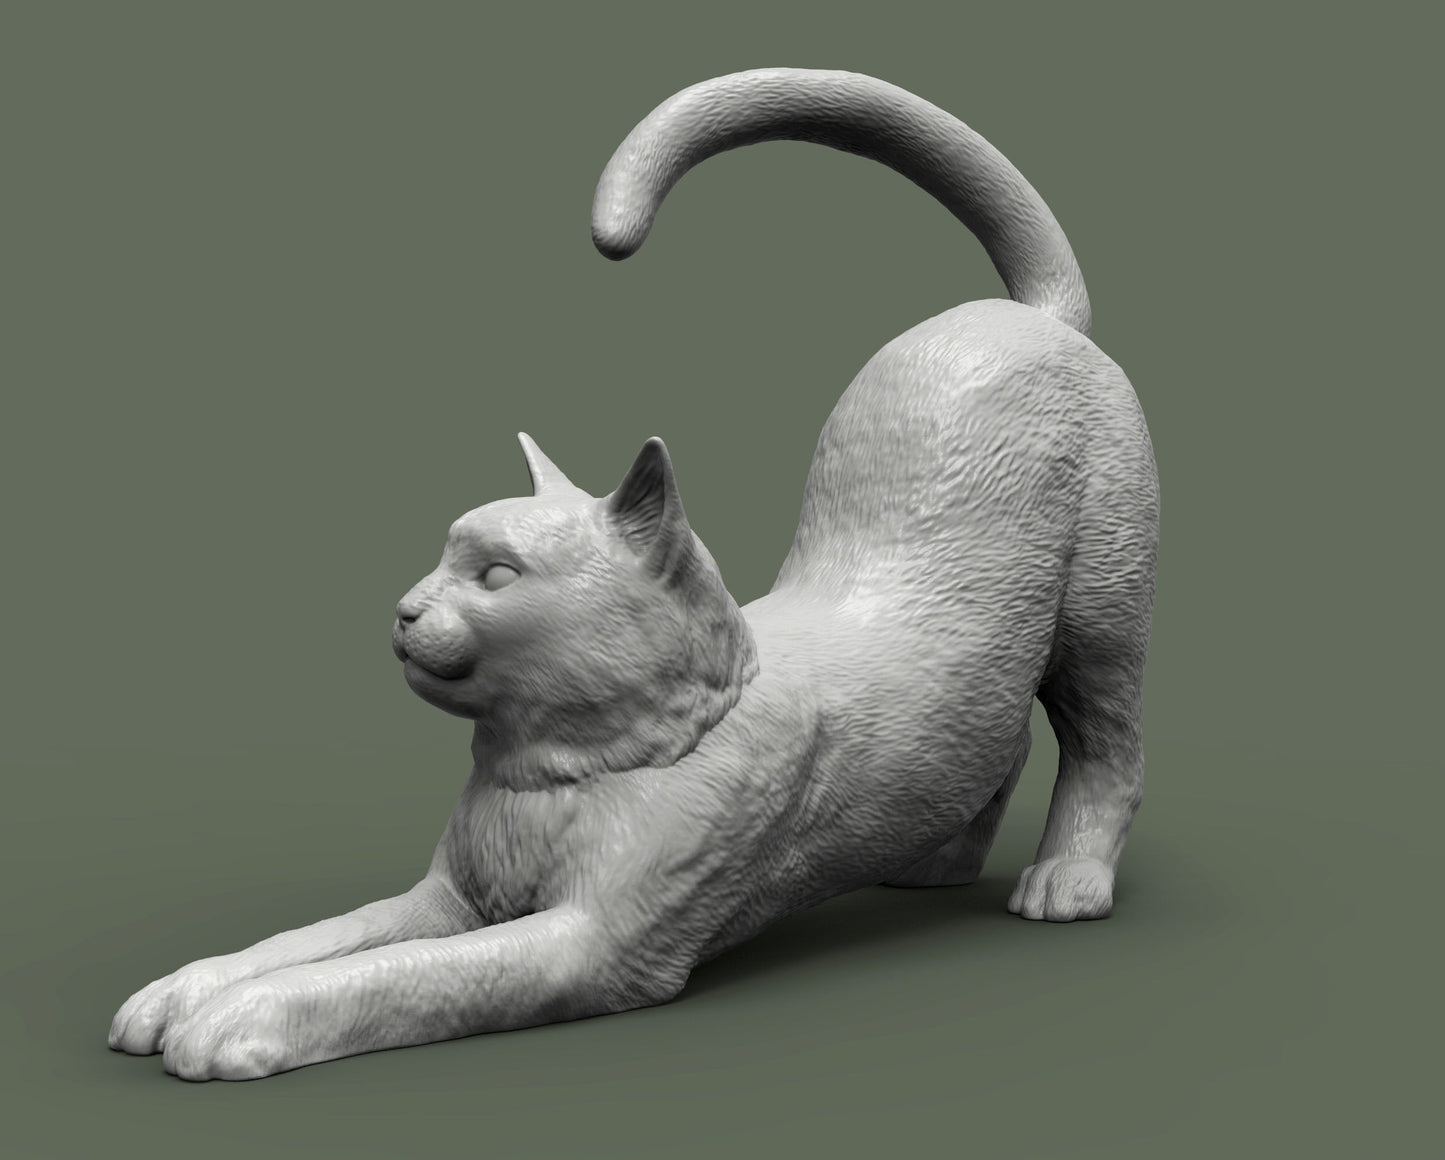 Cats - Many options - White resin ready to paint